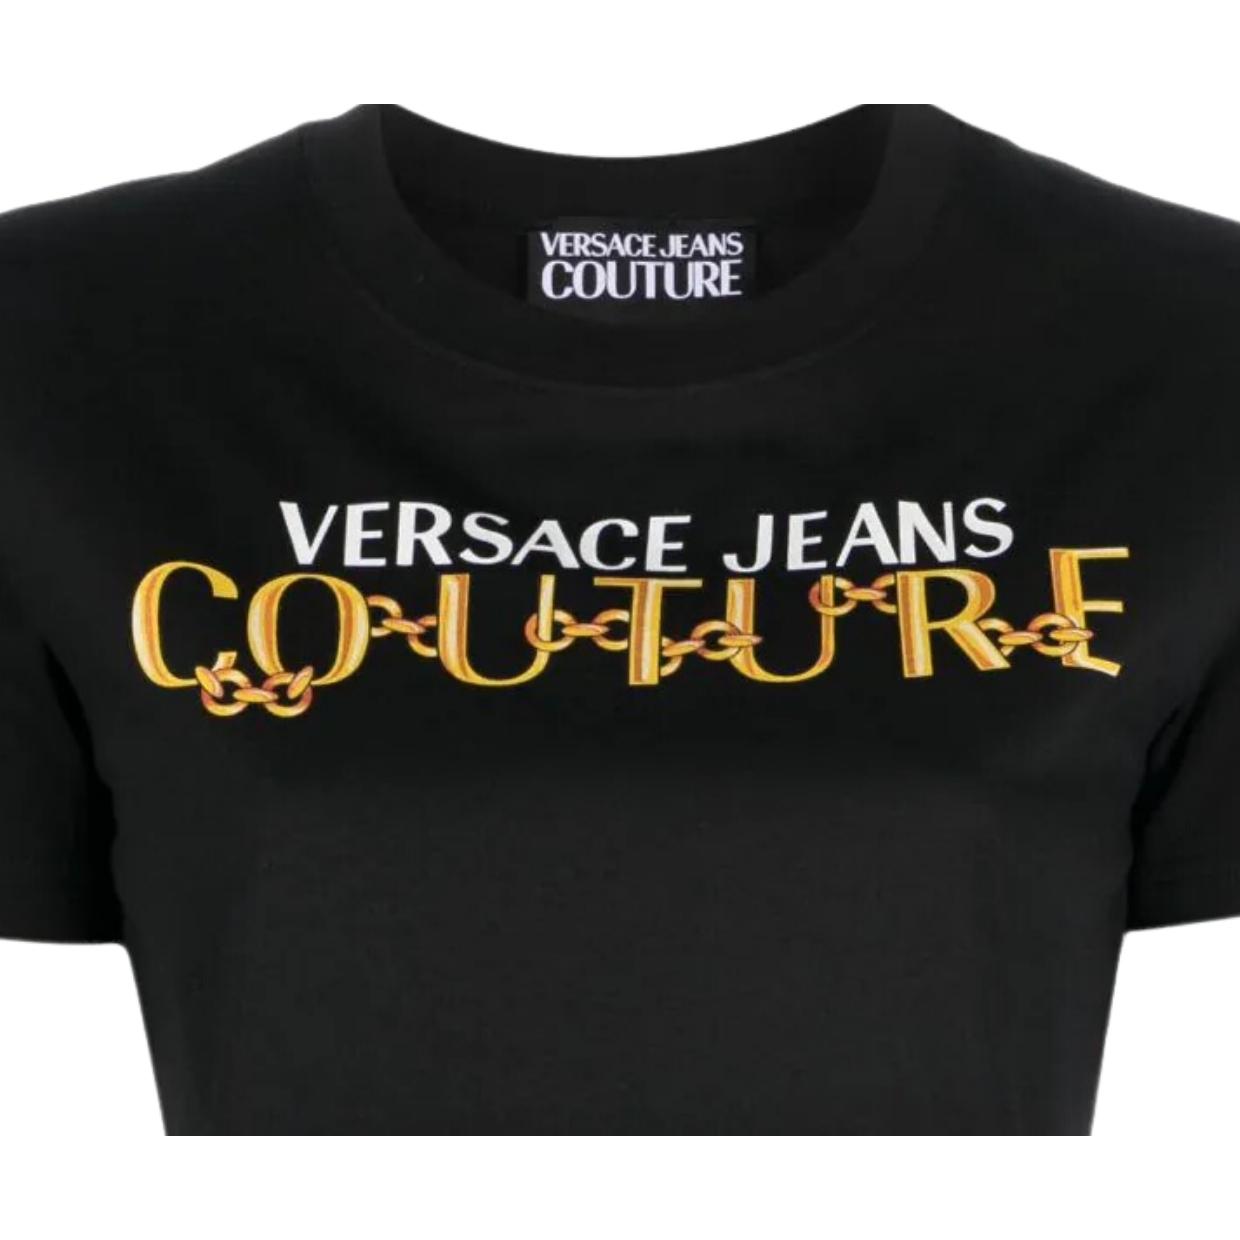 Versace Jeans Couture Bodysuit with 'Chain Couture' pattern, GenesinlifeShops, Women's Clothing